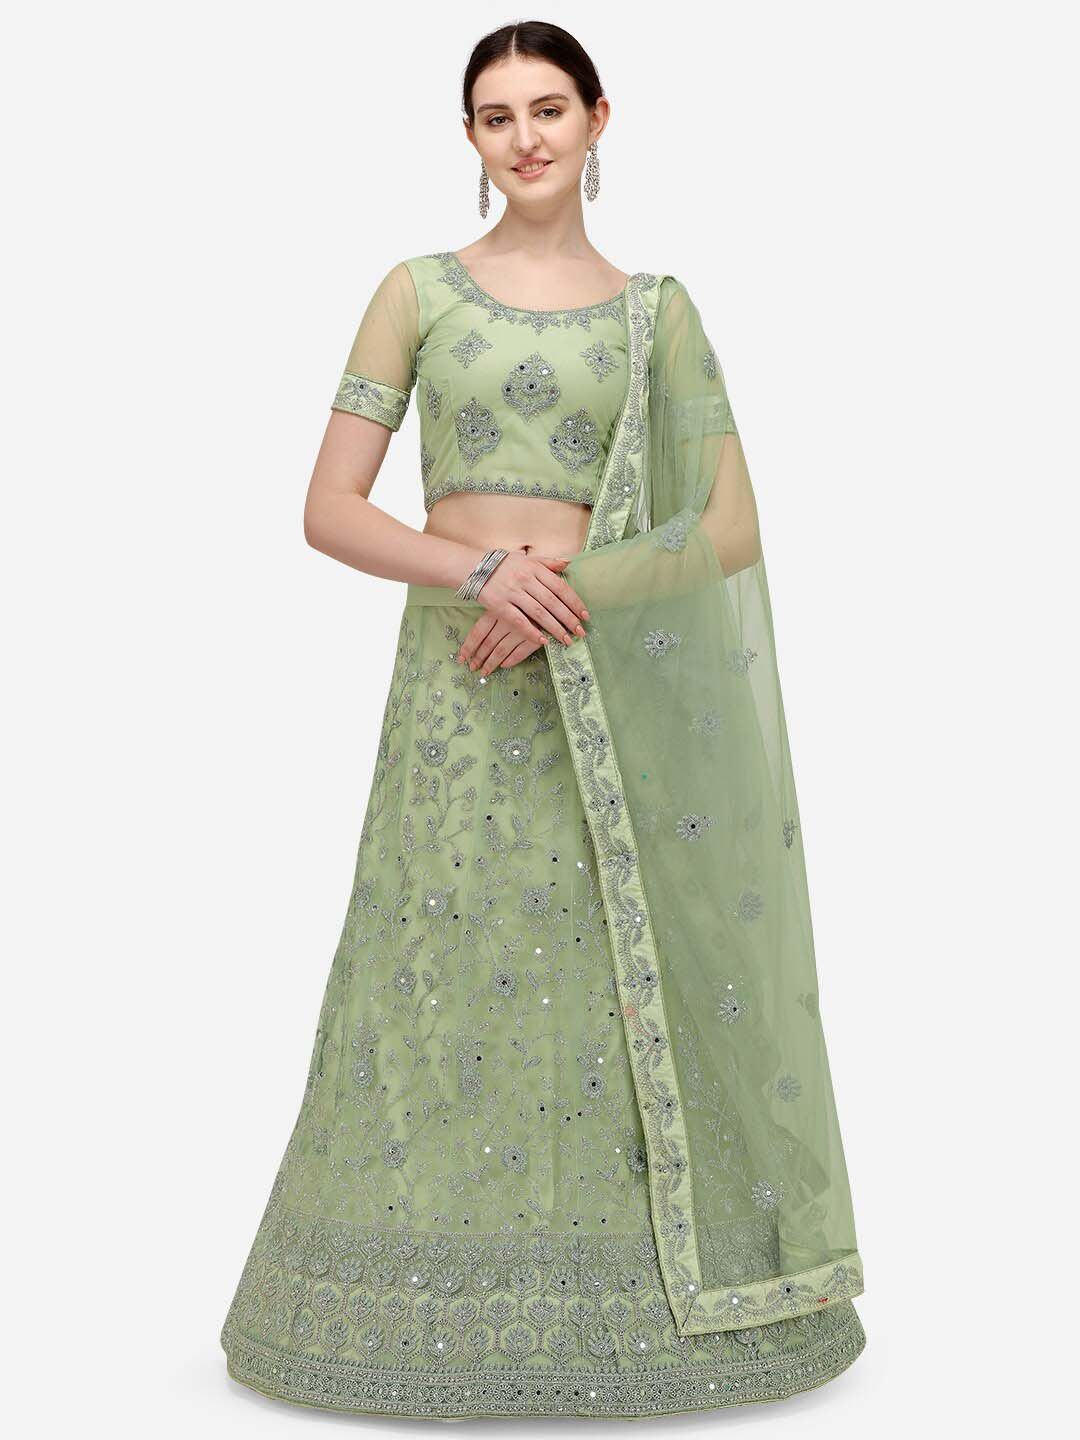 VRSALES Green & Silver-Toned Embroidered Mirror Work Semi-Stitched Lehenga & Unstitched Blouse With Dupatta Price in India